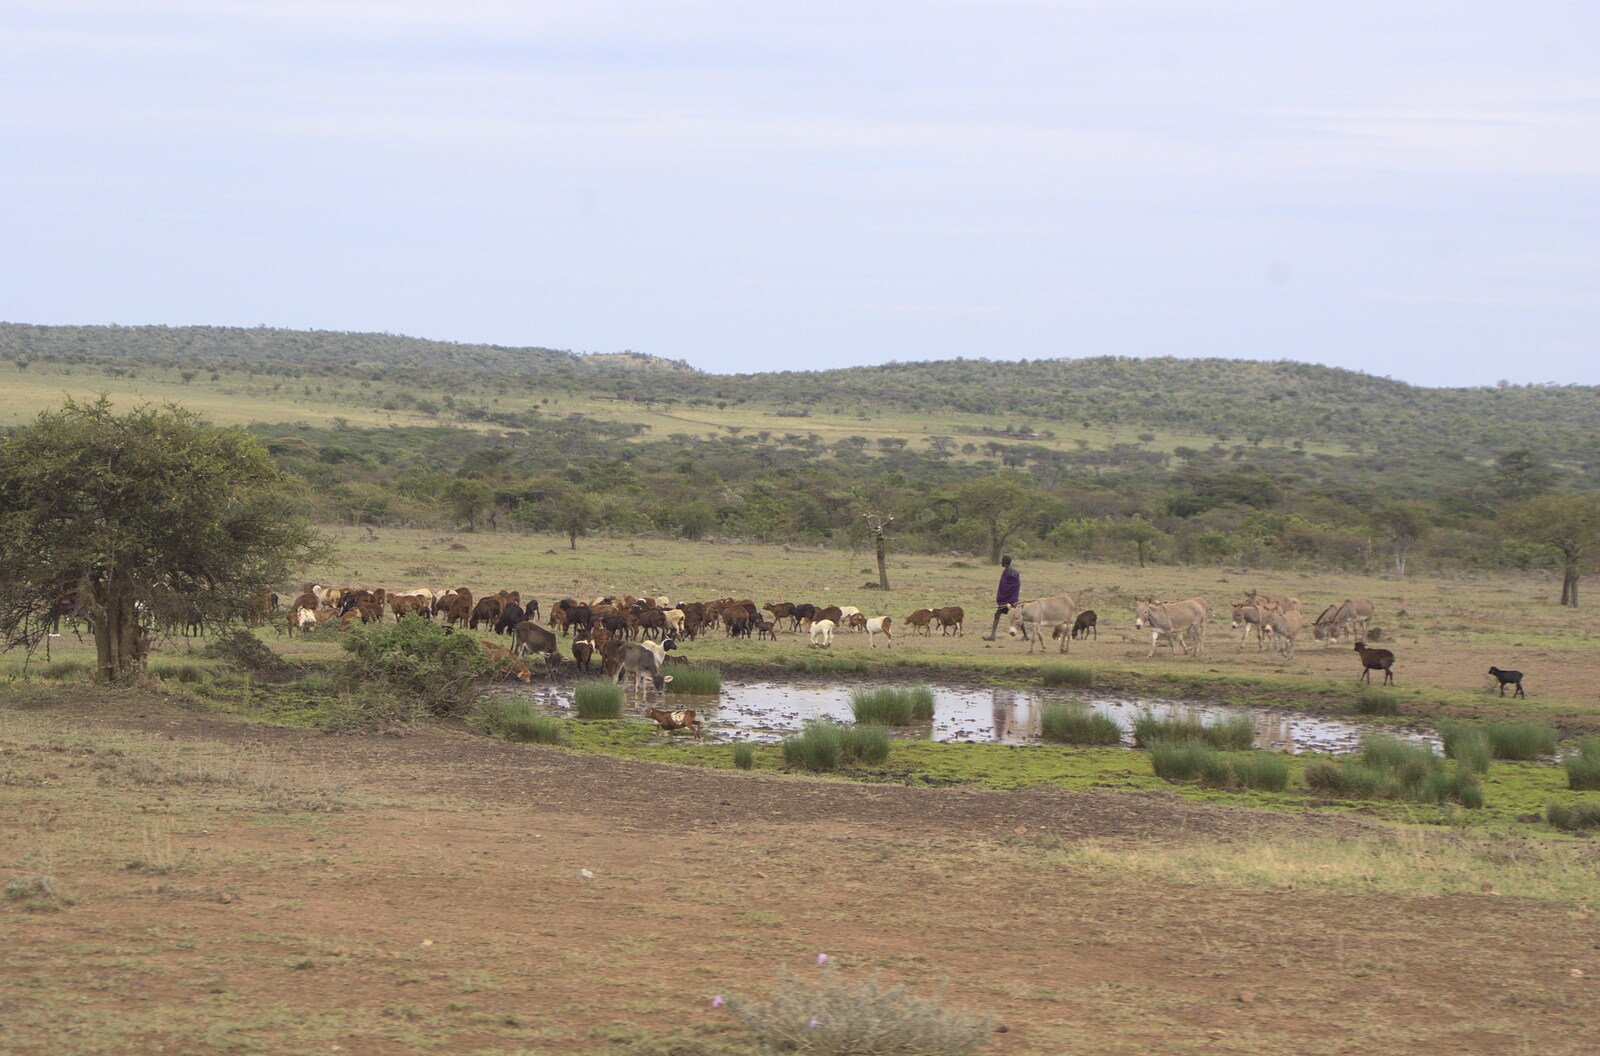 Narok to Naivasha and Hell's Gate National Park, Kenya, Africa - 5th November 2010: Sheep are herded past a pond